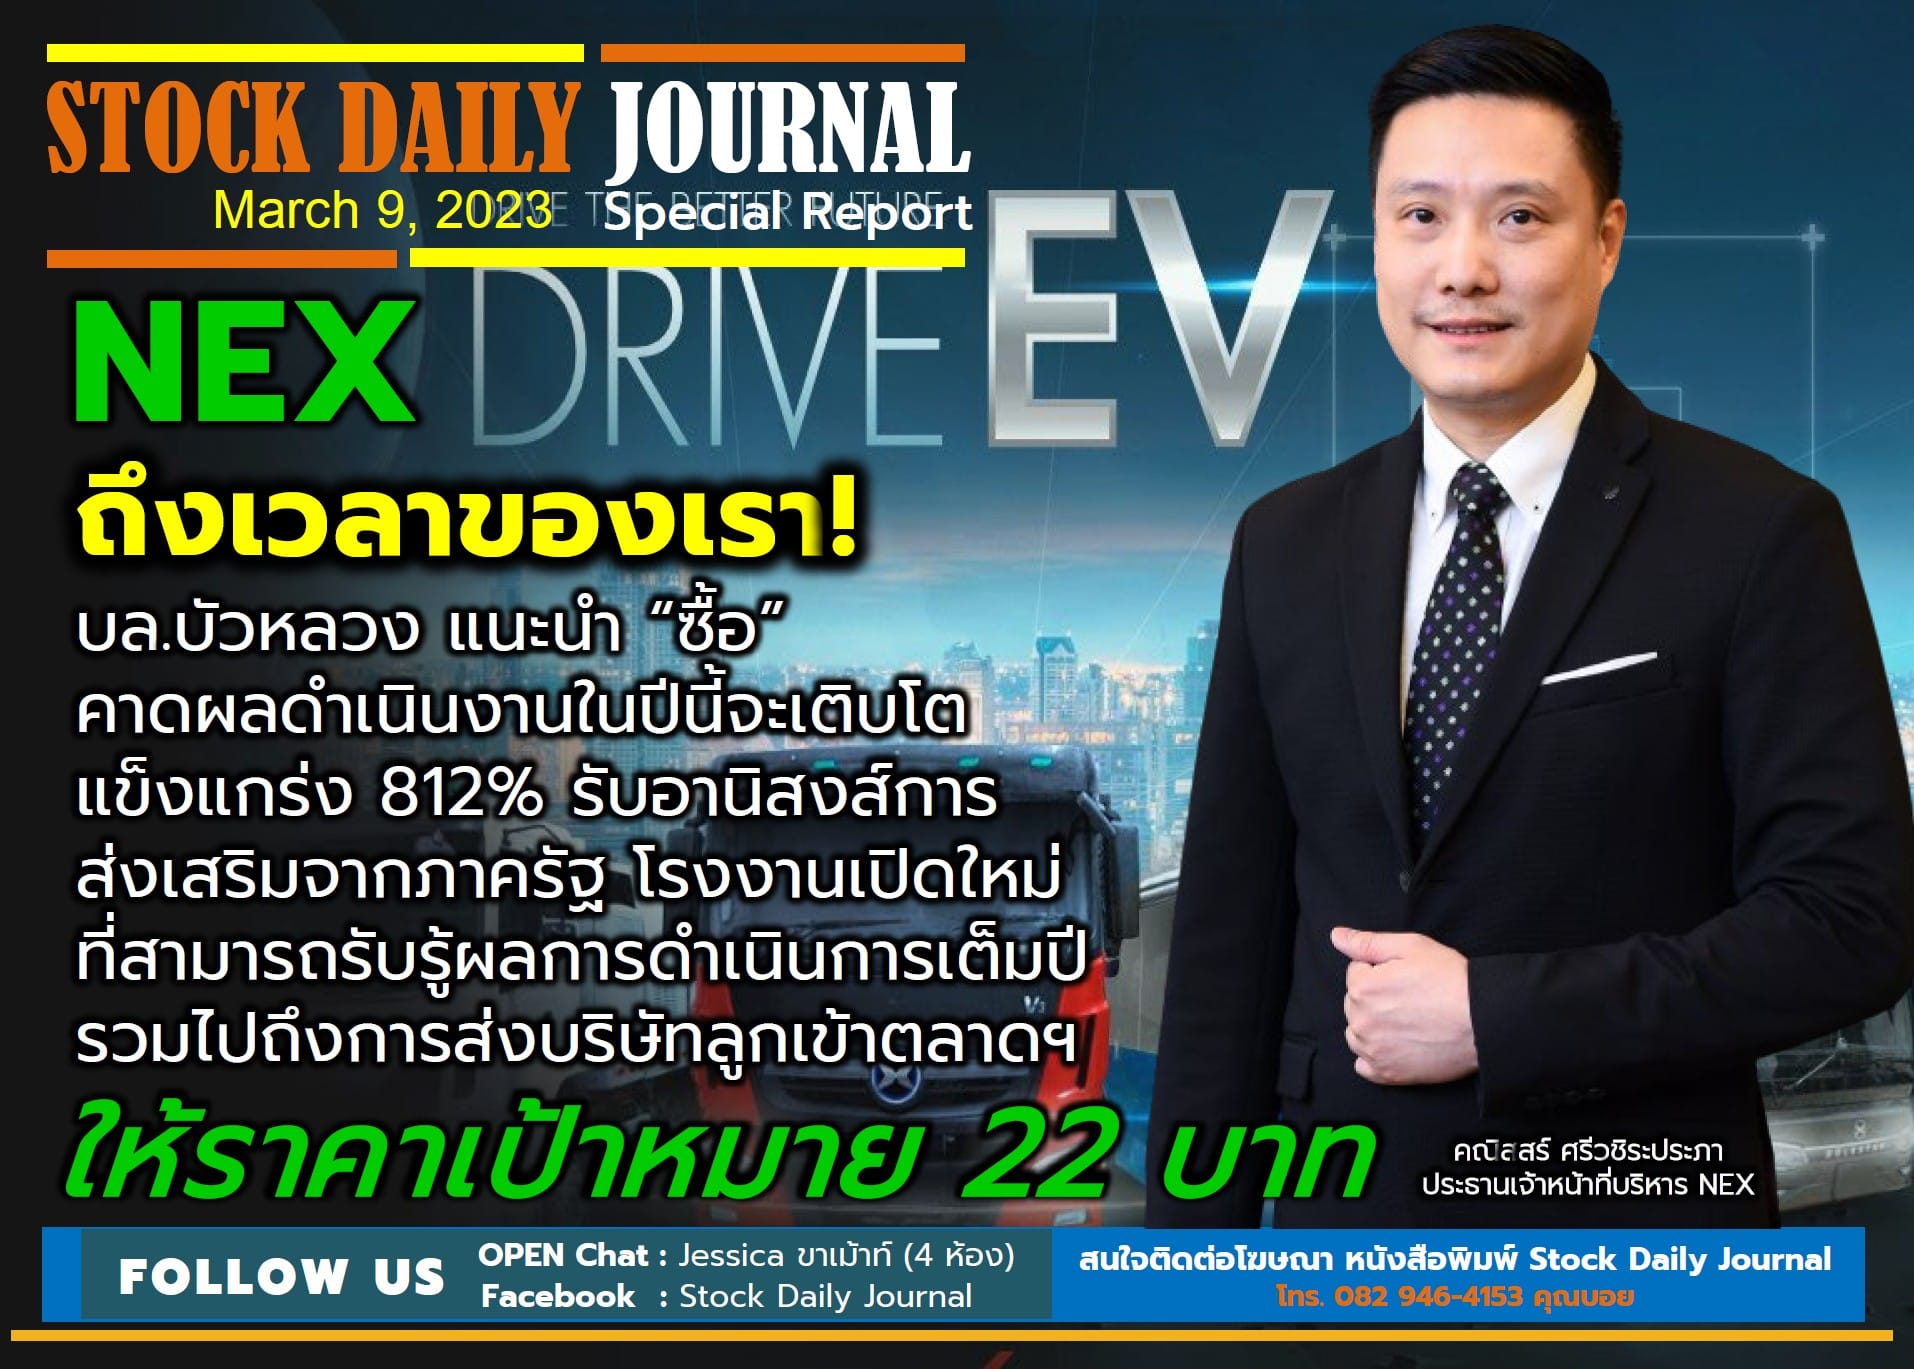 STOCK DAILY JOURNAL “Special Report : NEX”